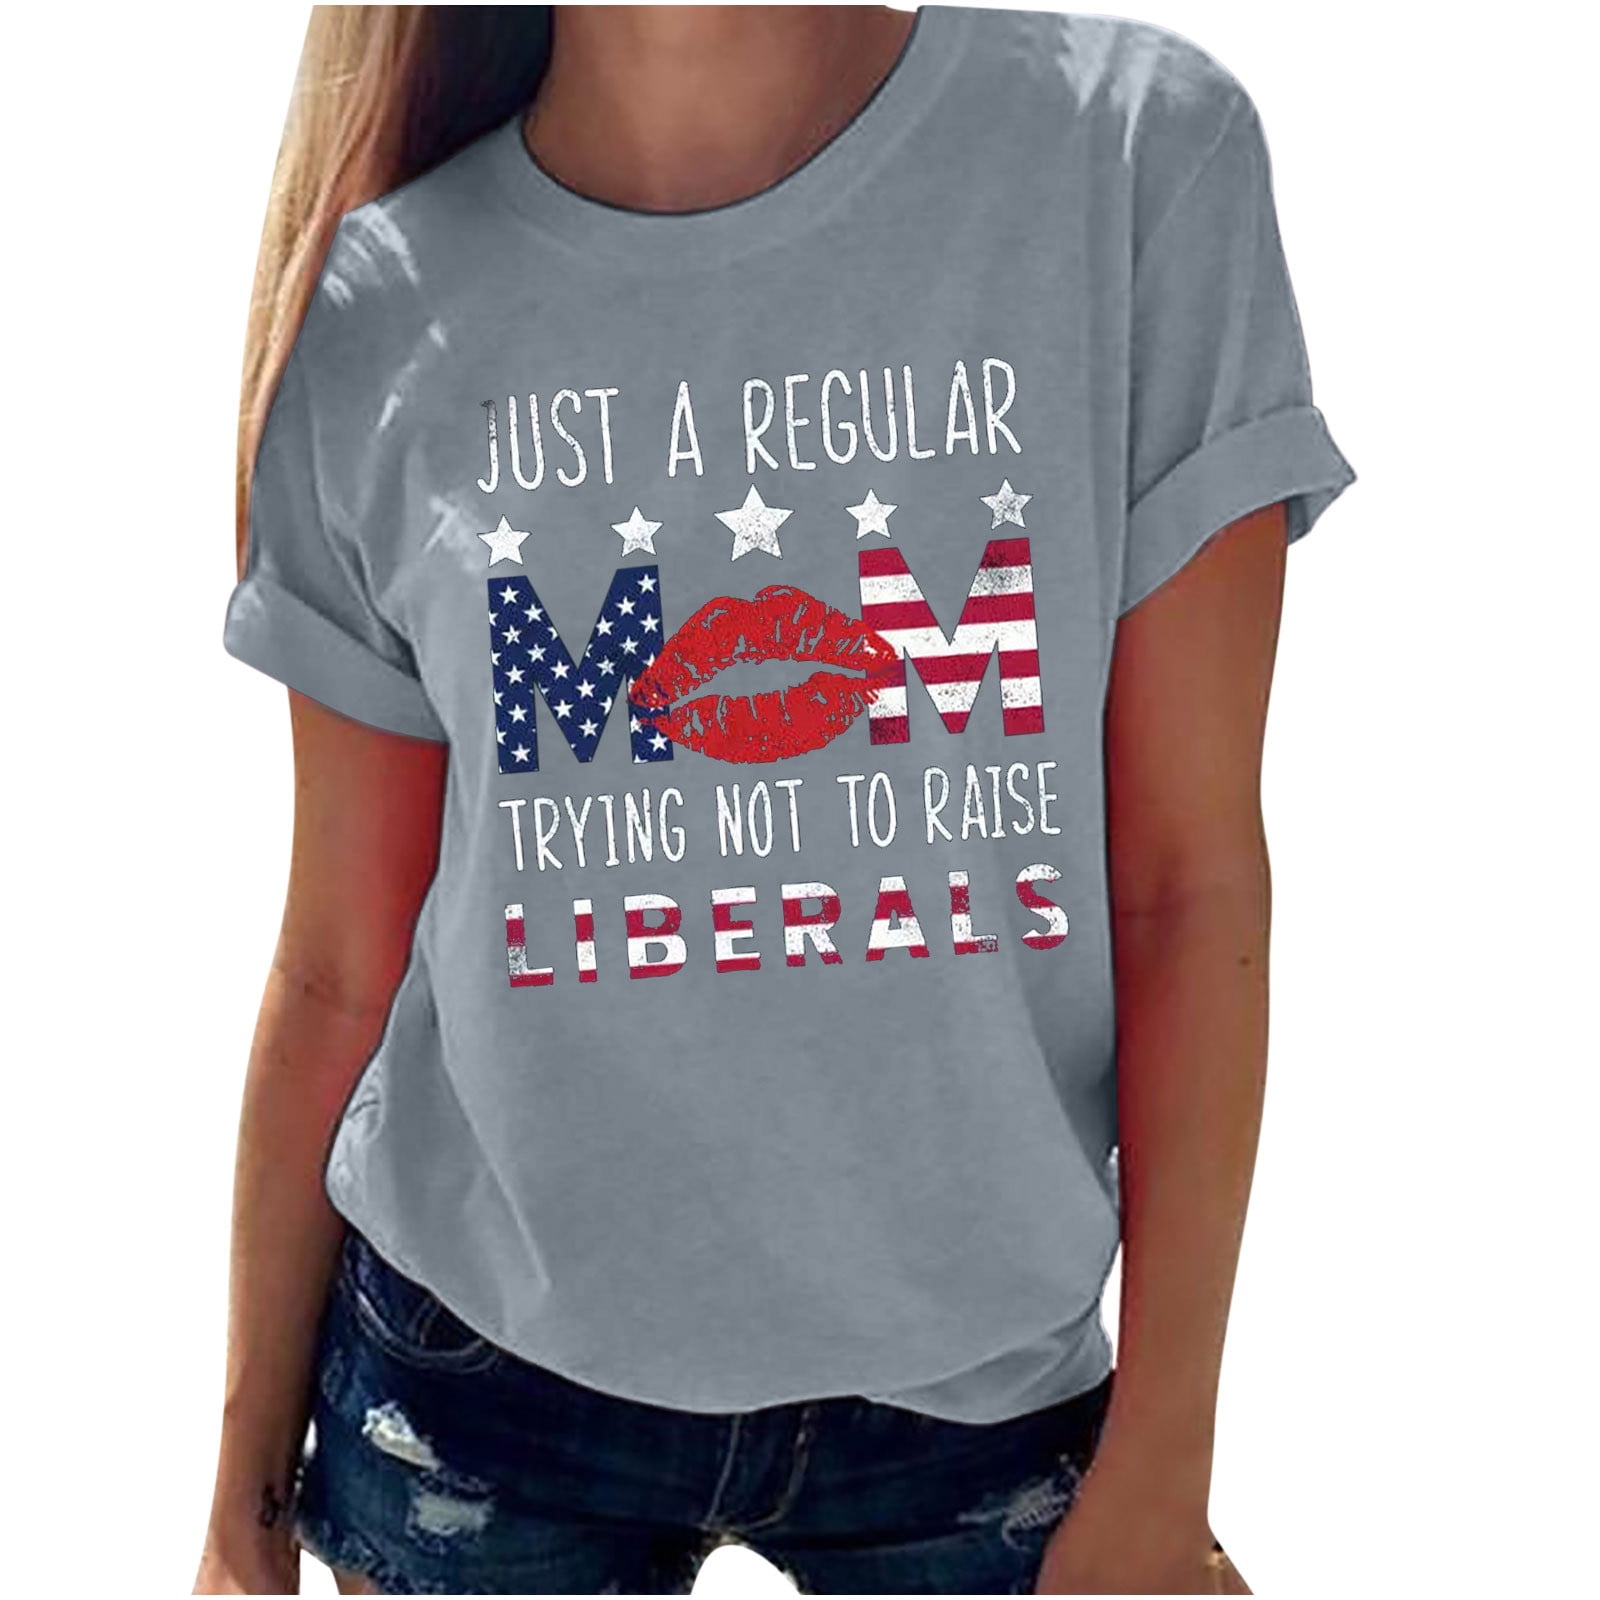 Fourth of July Shirts for Women 4th of July Tee Summer Short Sleeve Graphic T Shirt for Teen Girls 